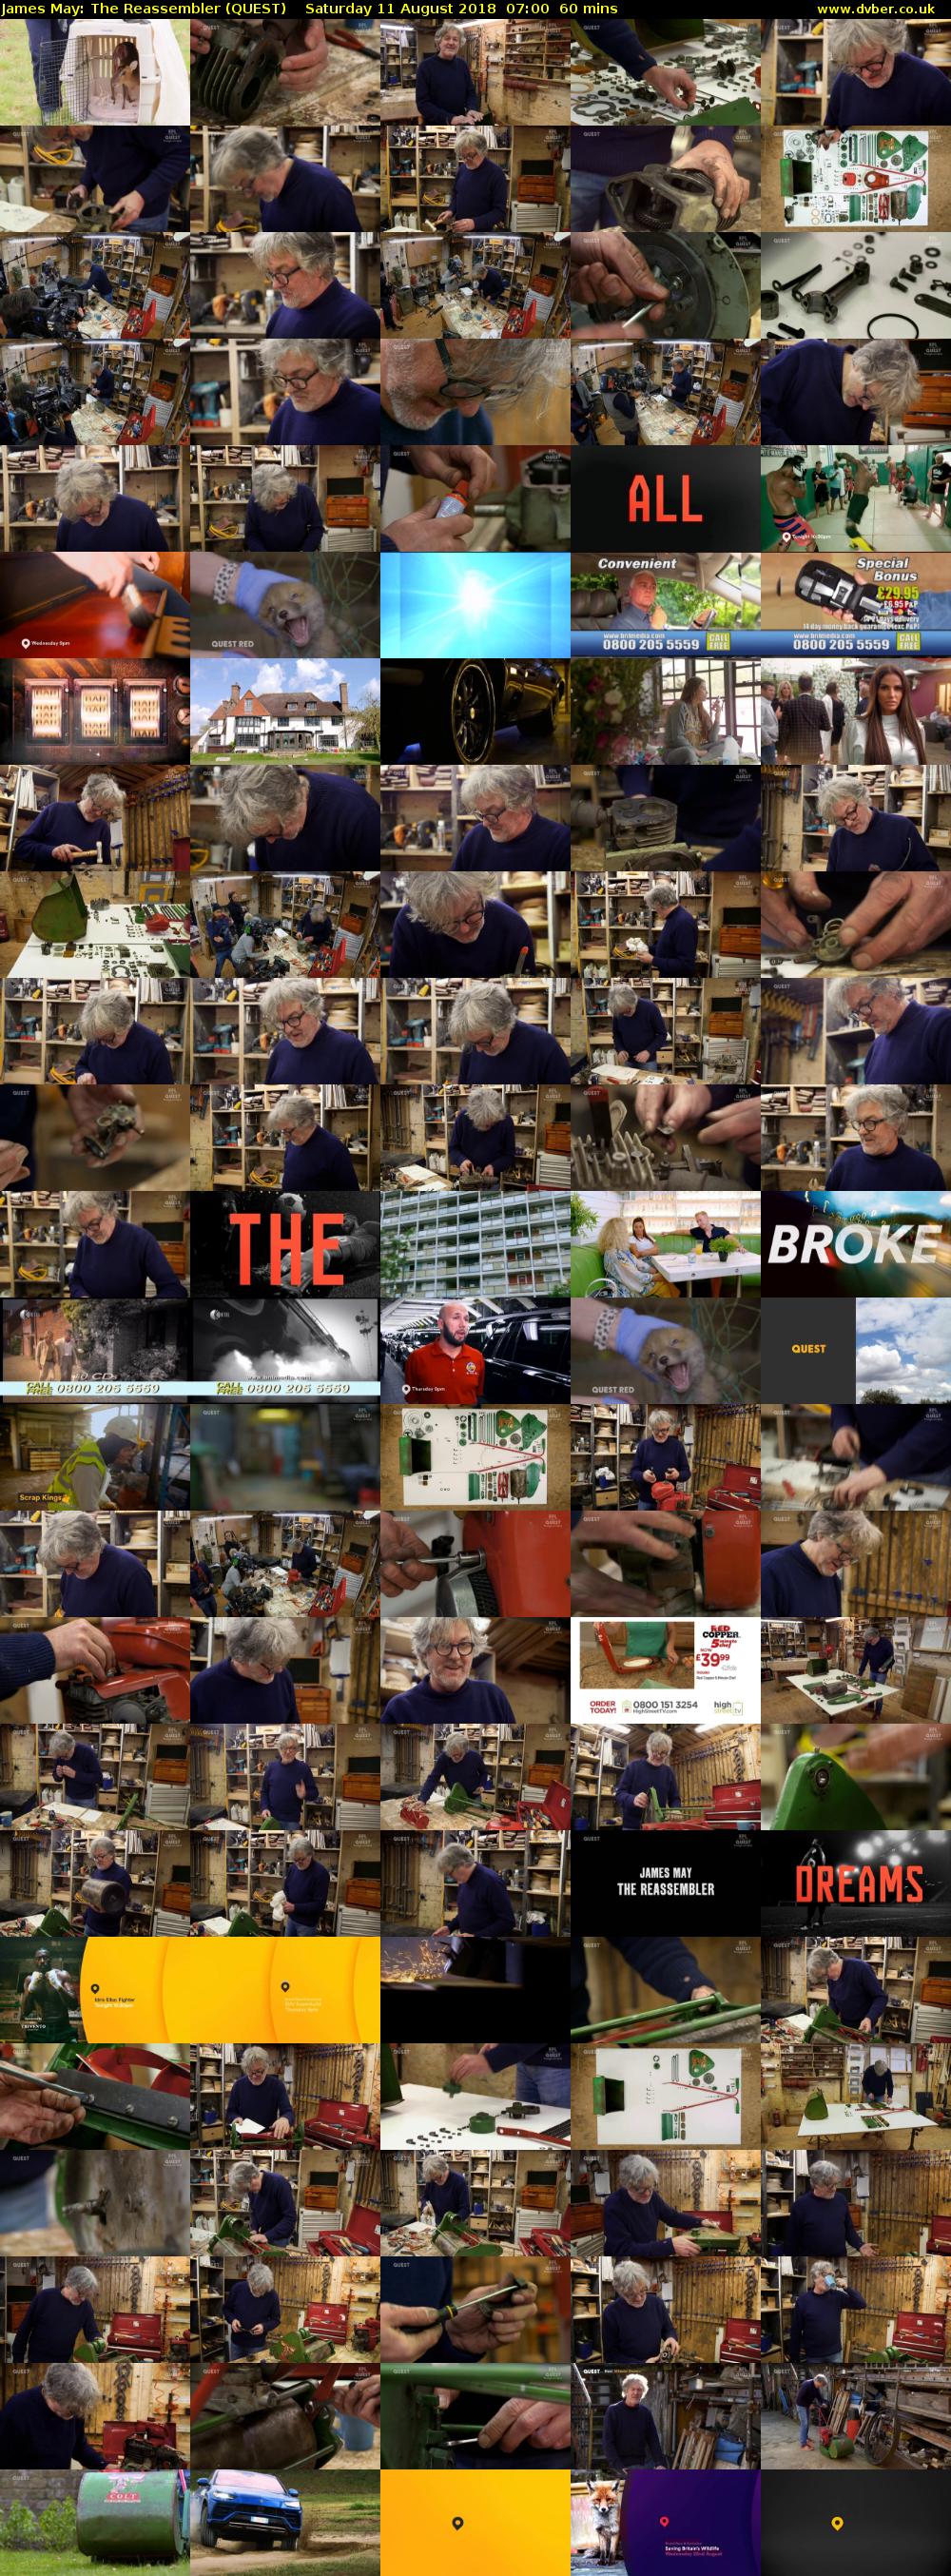 James May: The Reassembler (QUEST) Saturday 11 August 2018 07:00 - 08:00